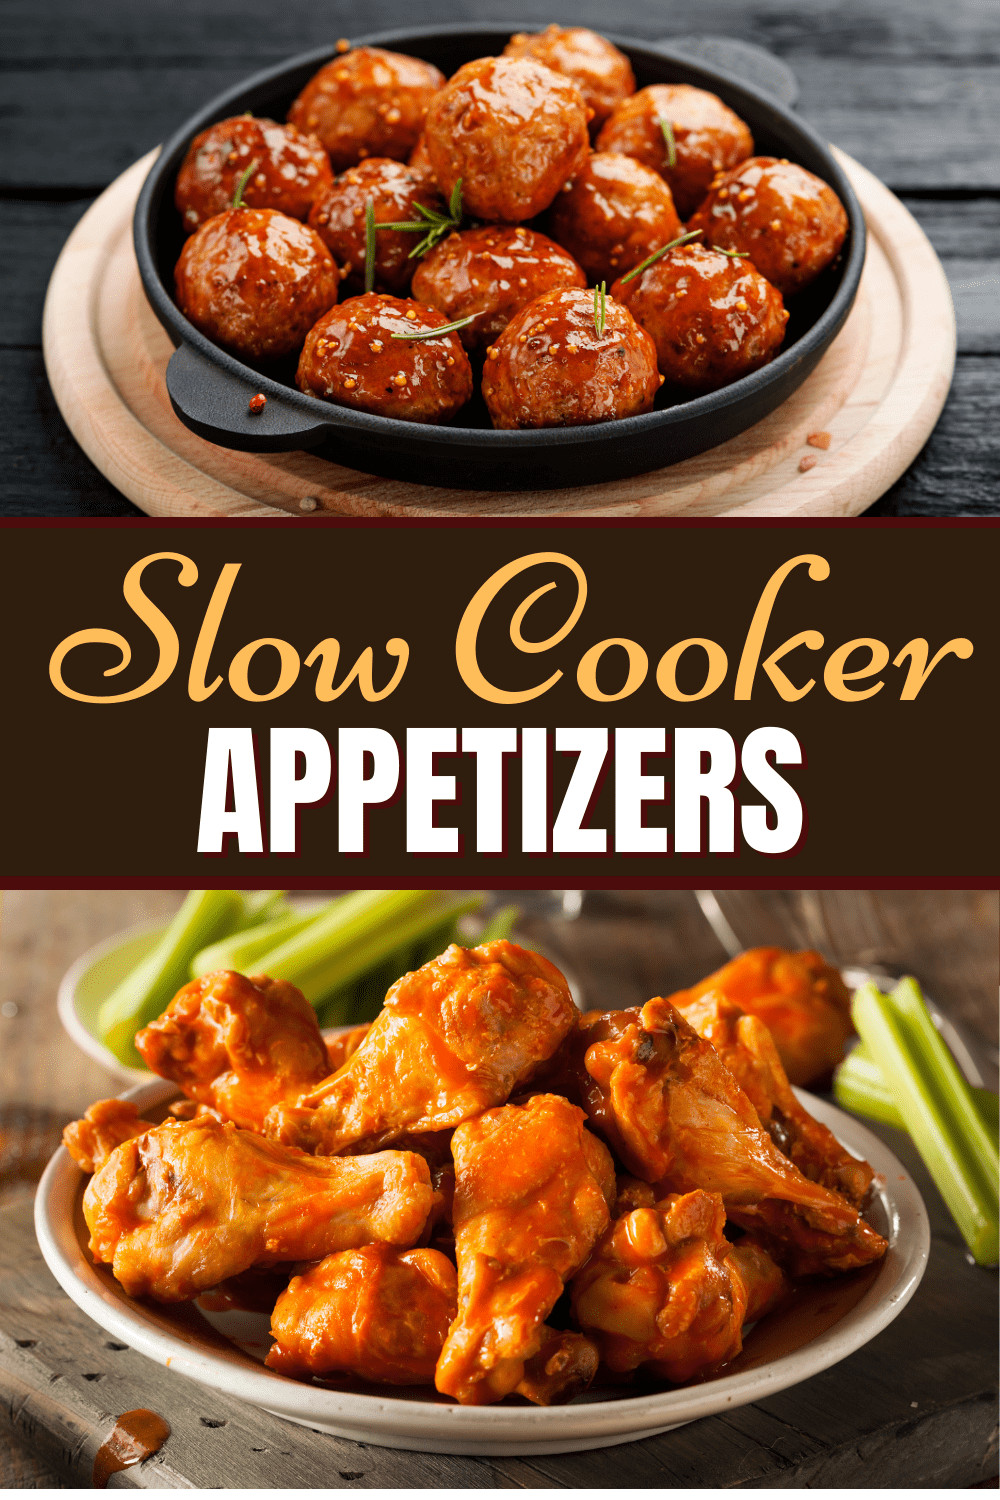 Easy Slow Cooker Appetizers Awesome 23 Easy Slow Cooker Appetizers Insanely Good